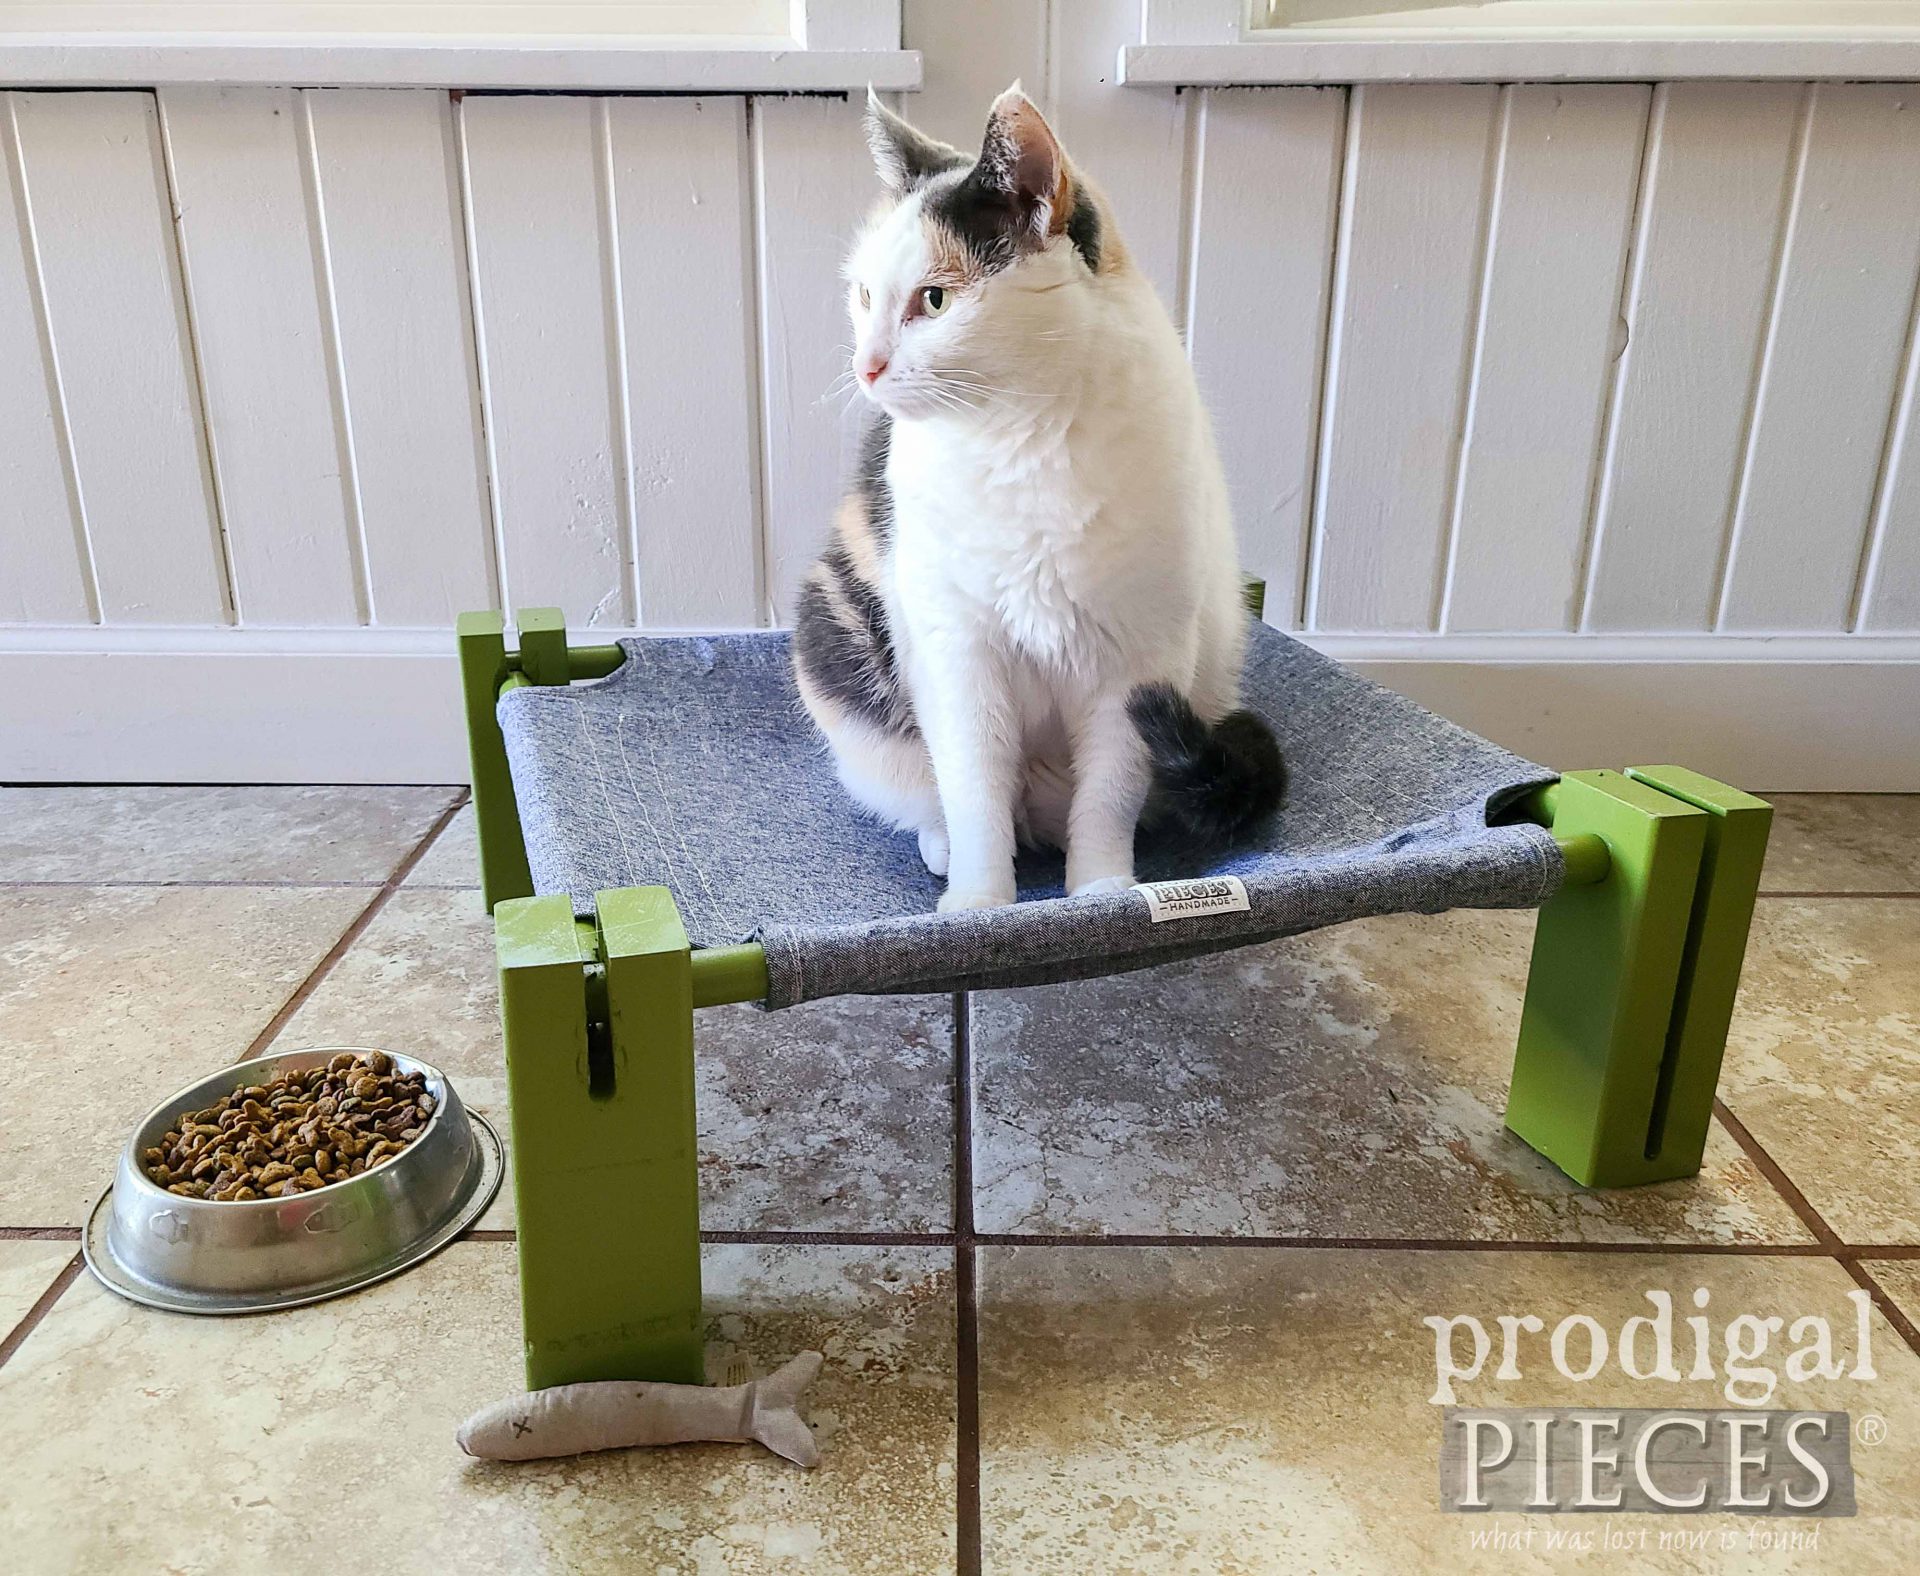 Calico Cat Sitting on Upcycled Cot built by Larissa of Prodigal Pieces | prodigalpieces.com #prodigalpieces #upcycled #diy #cat #dog #pets